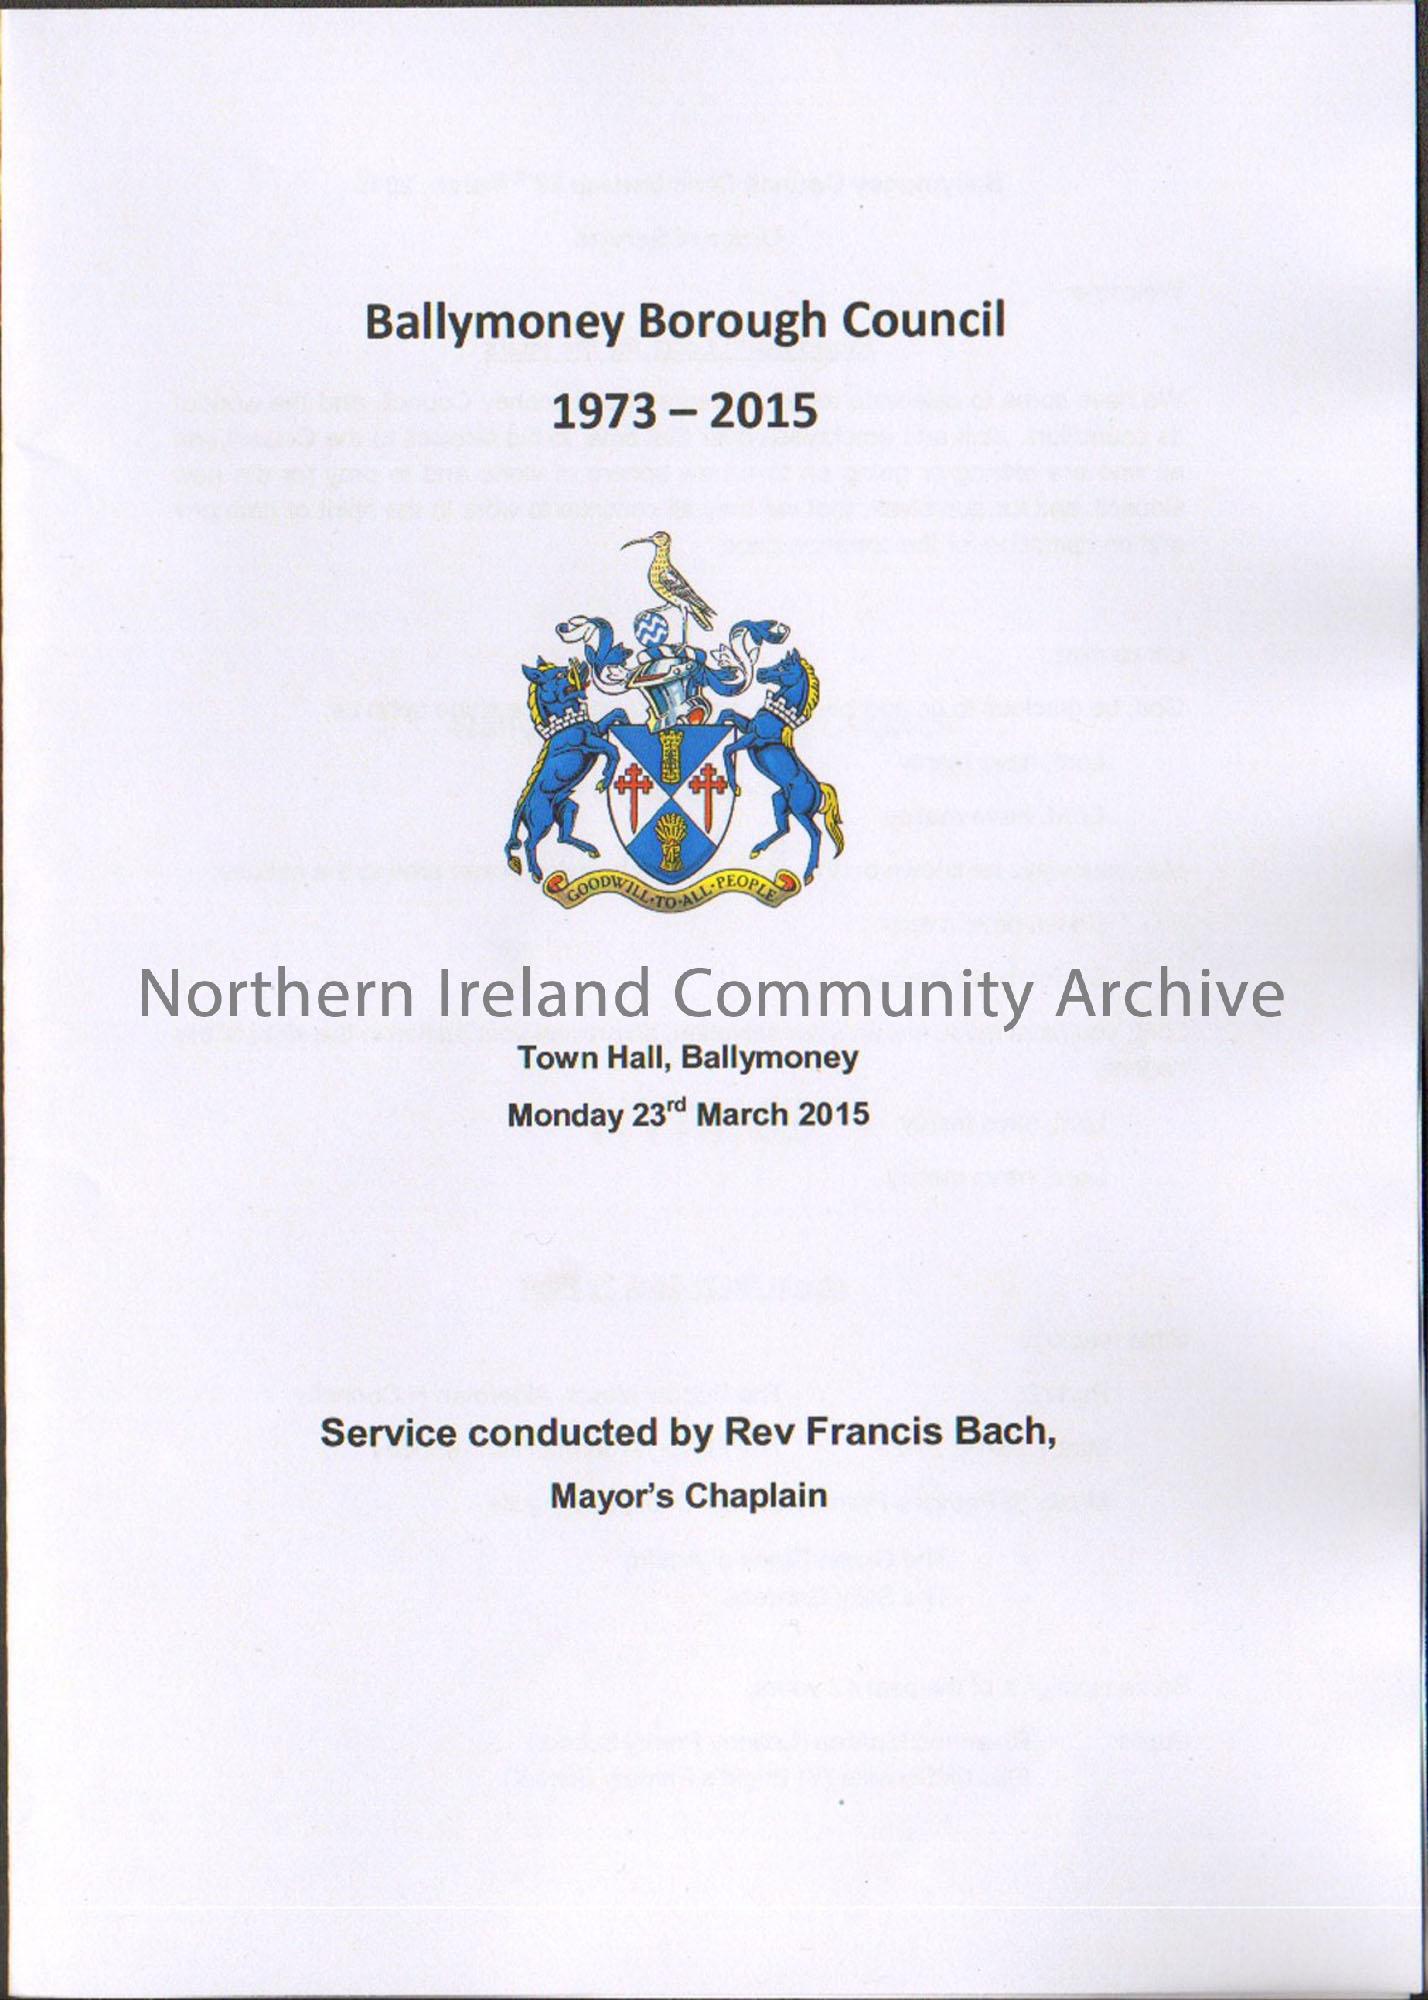 Ballymoney Borough Council 1973-2015 Civic Service. White leaflet with Ballymoney Borough Council coat of arms on the front.